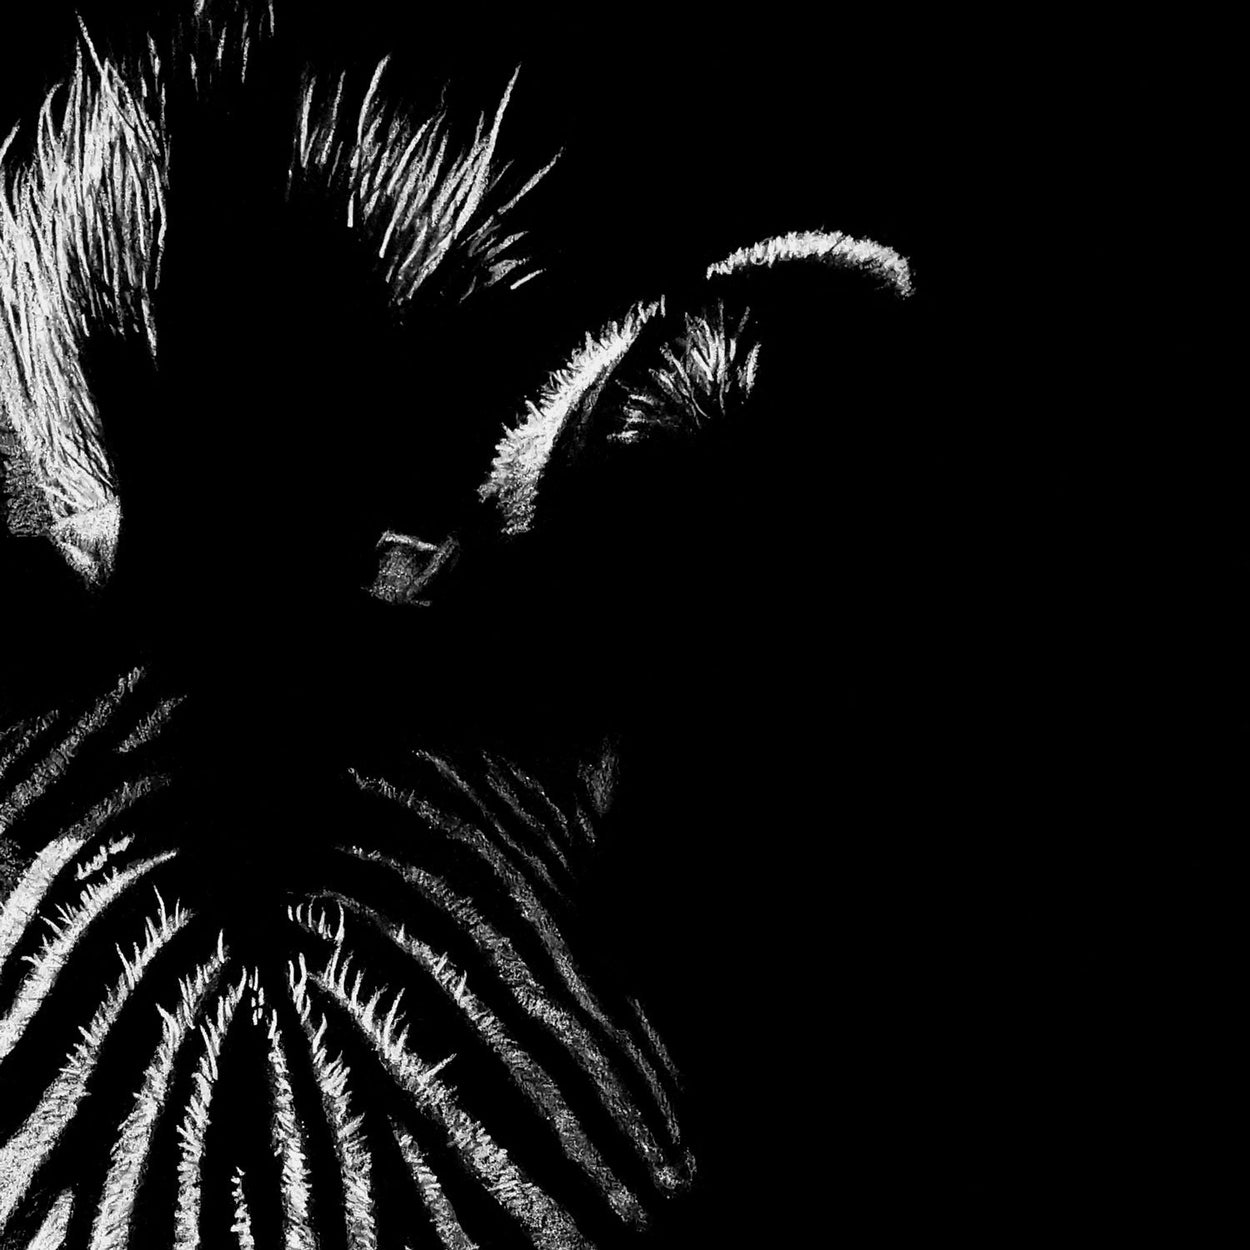 Zebra drawing close-up - The Thriving Wild